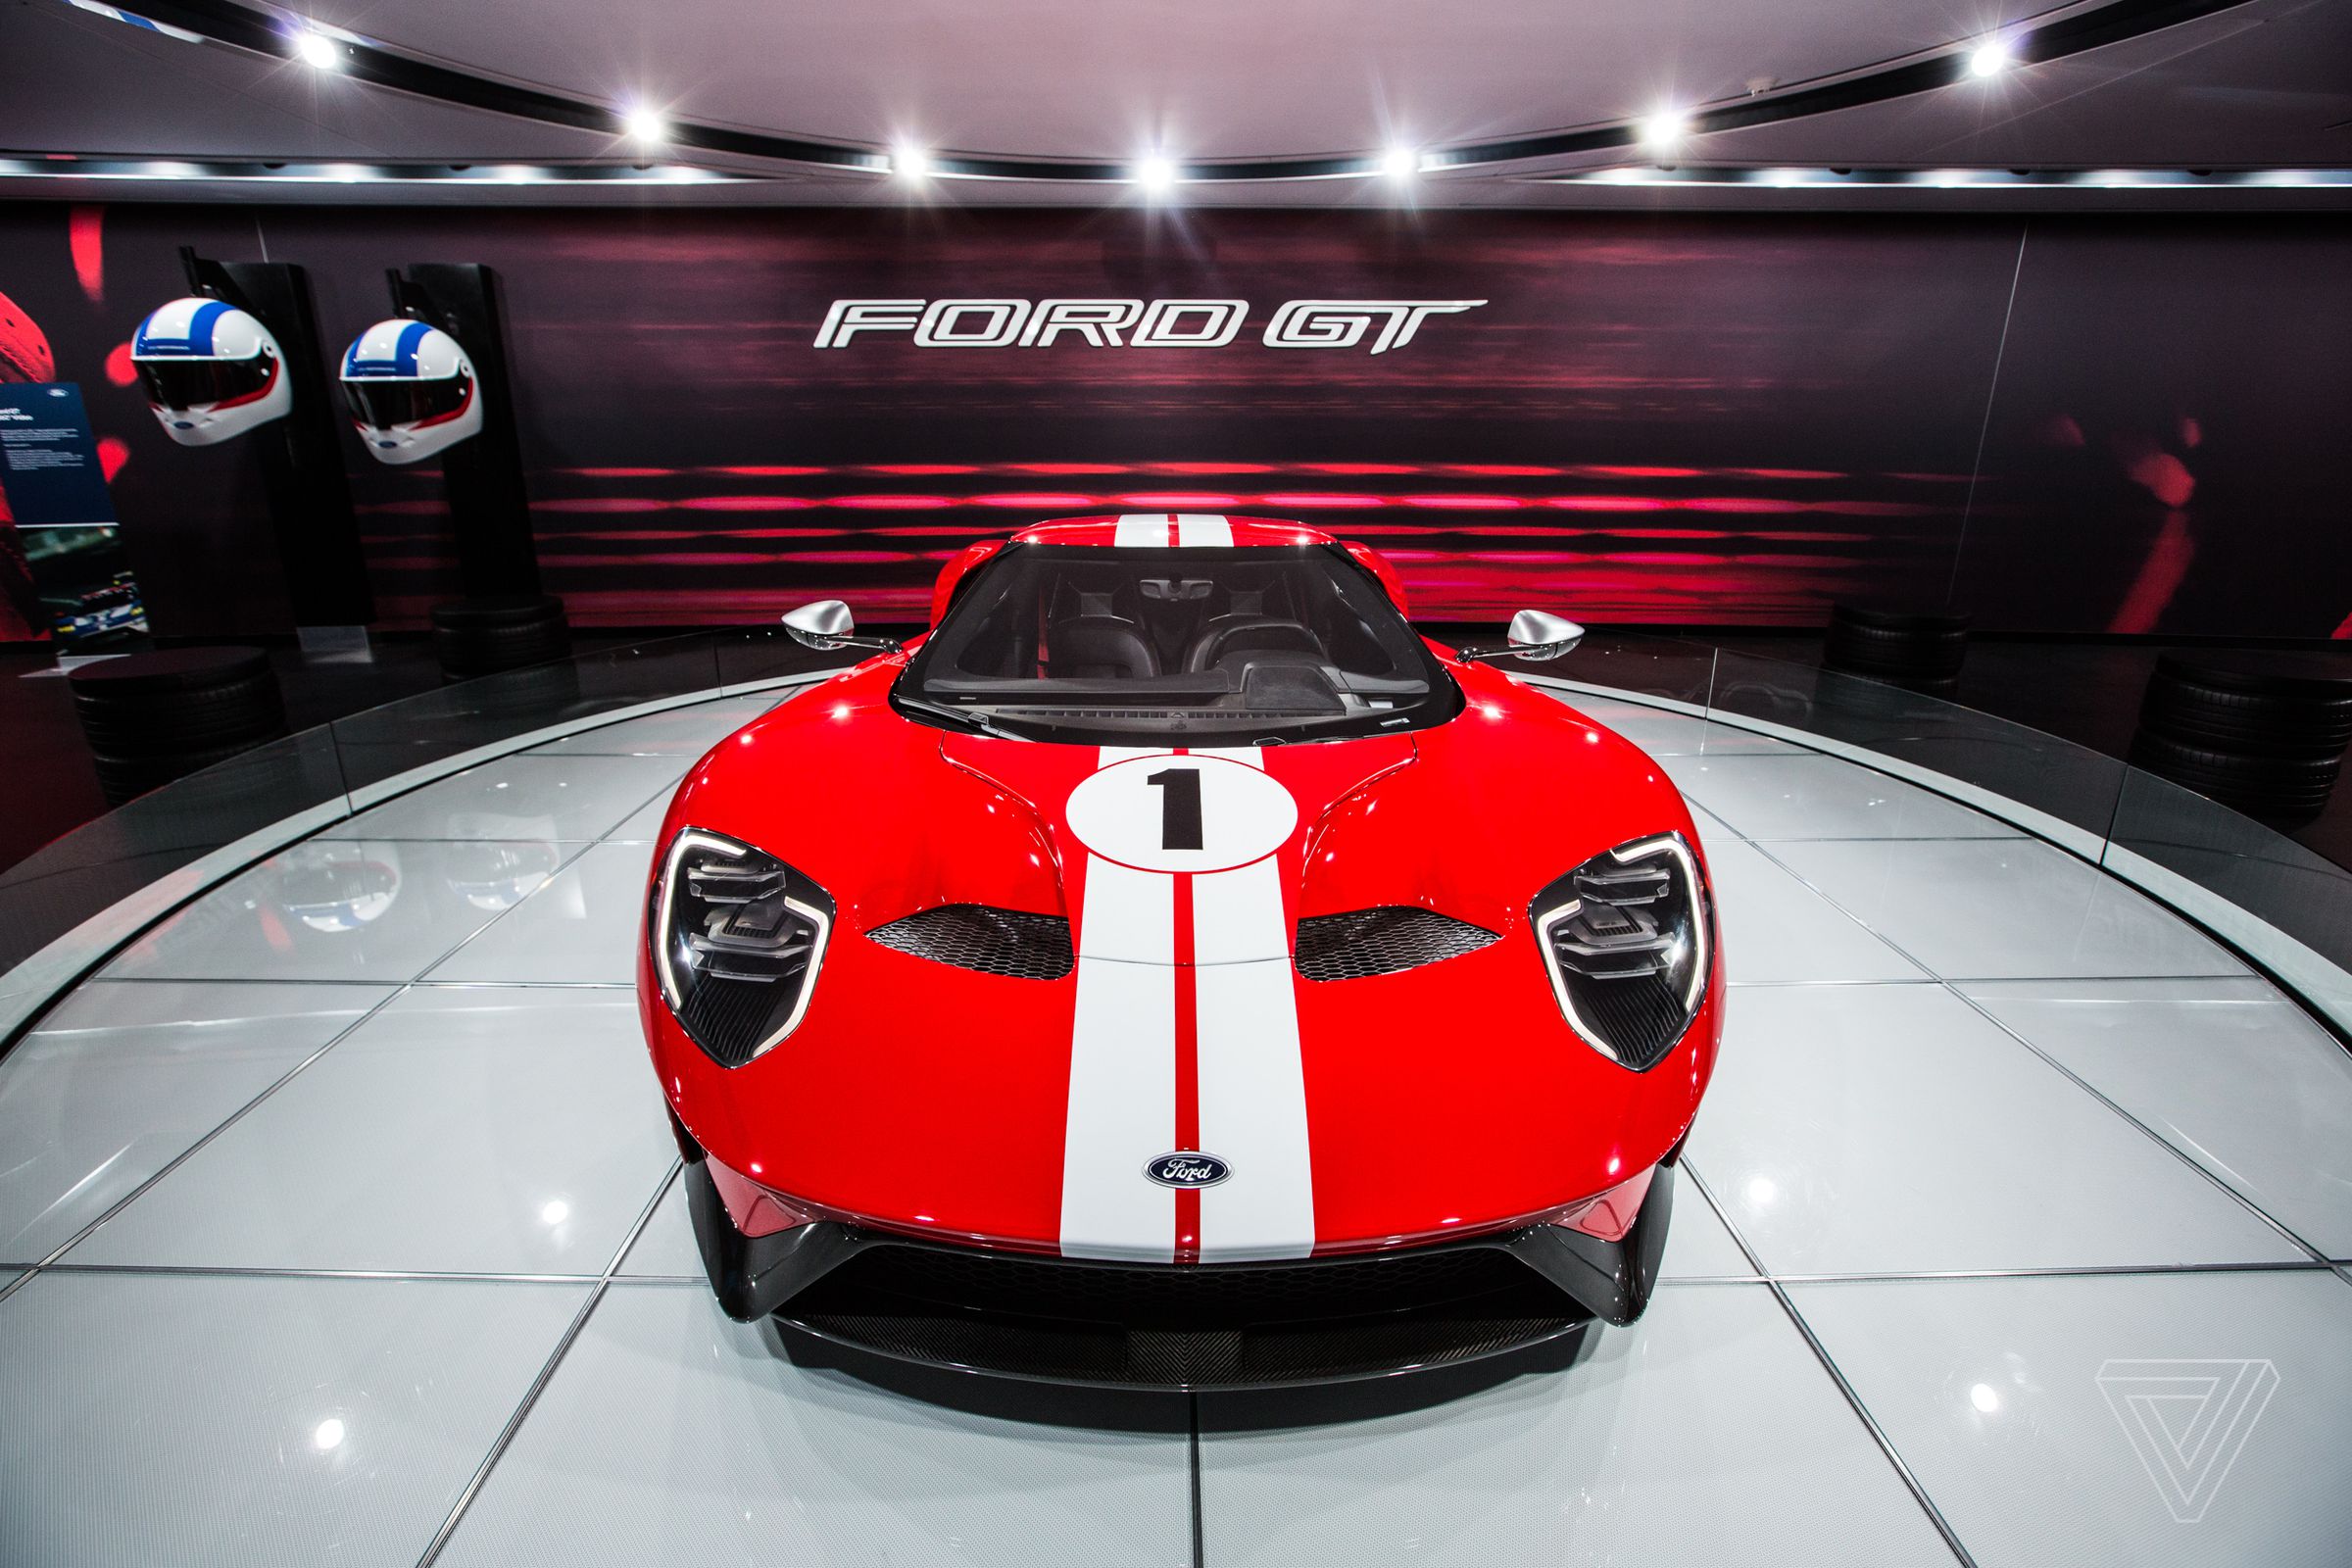 Ford’s always-stunning GT occupies a space in the back of the company’s massive booth.